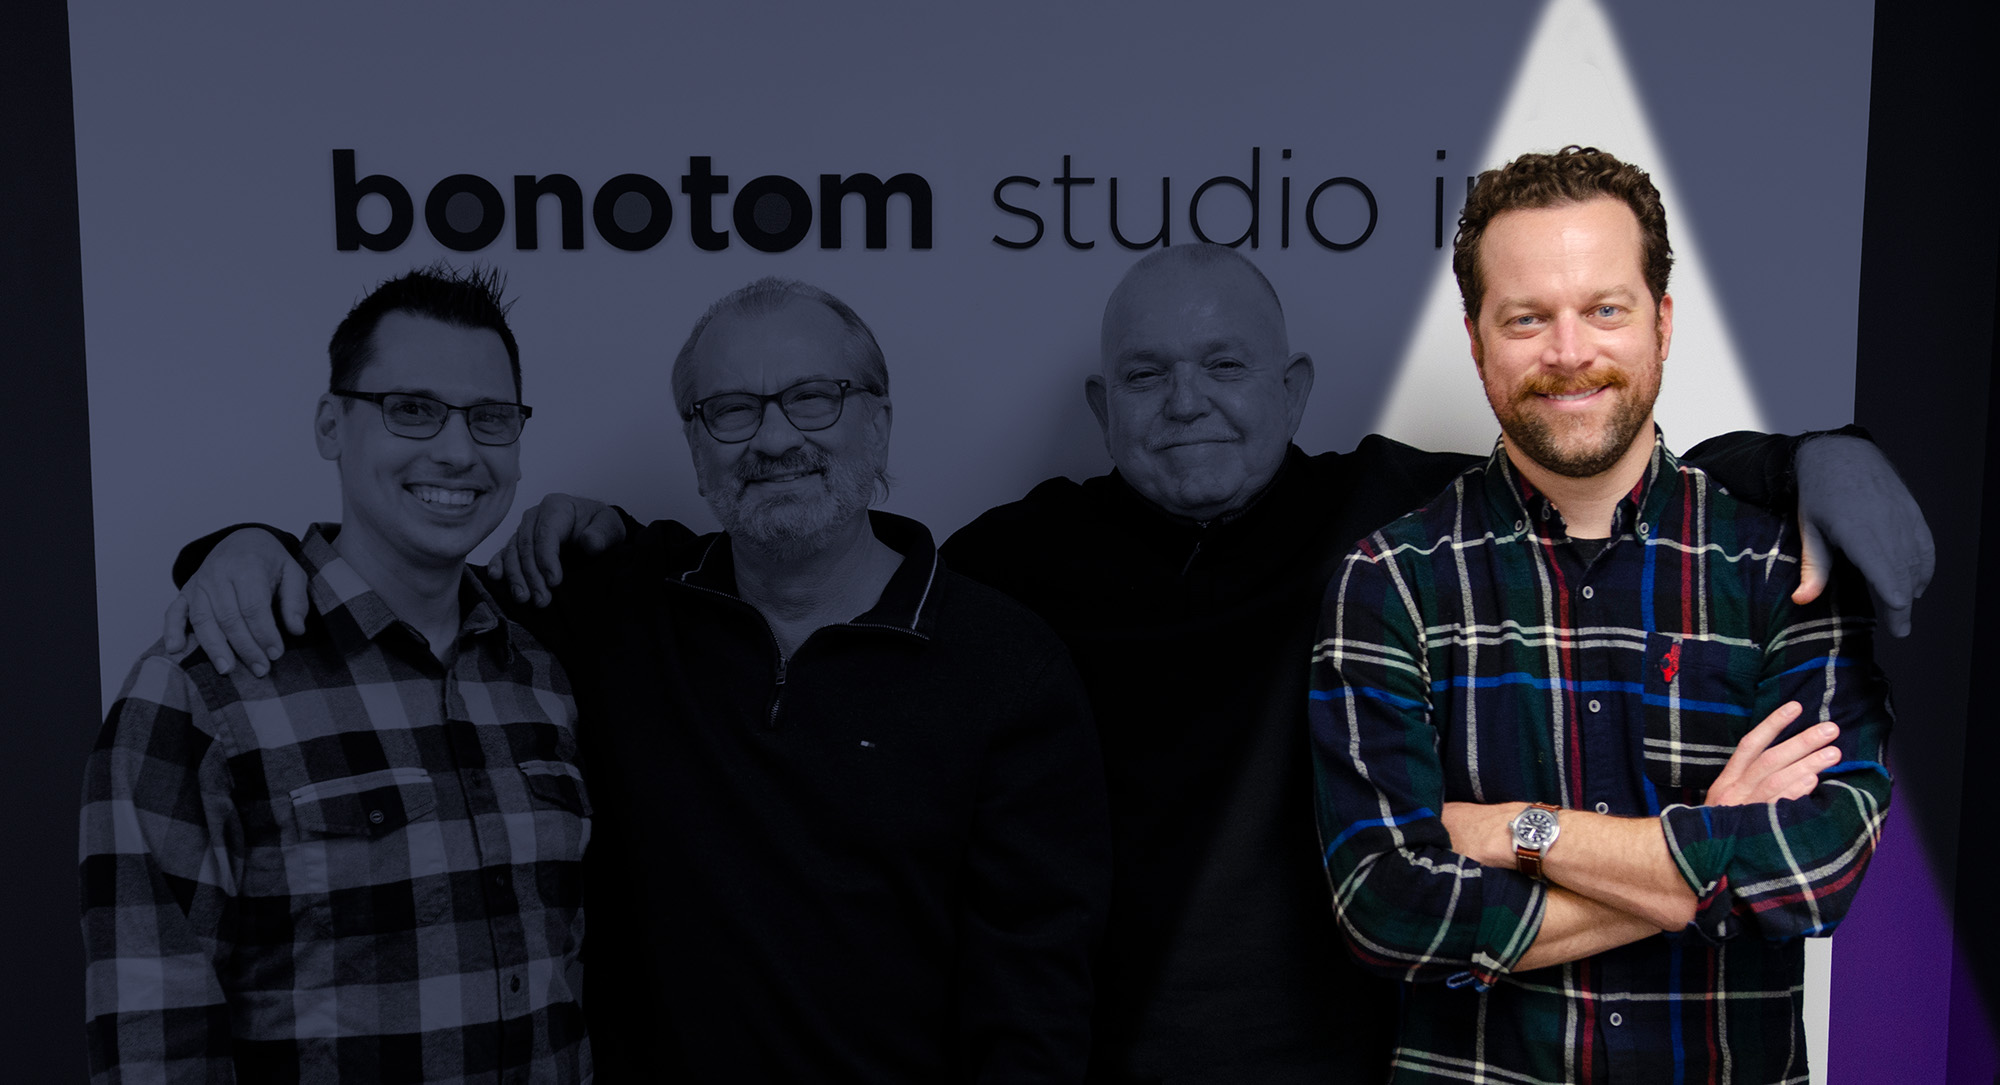 Four men smiling and posing in front of a wall with the logo "bonotom studio," with Paul Philpott and another man in the center embracing, while the others stand on the sides.